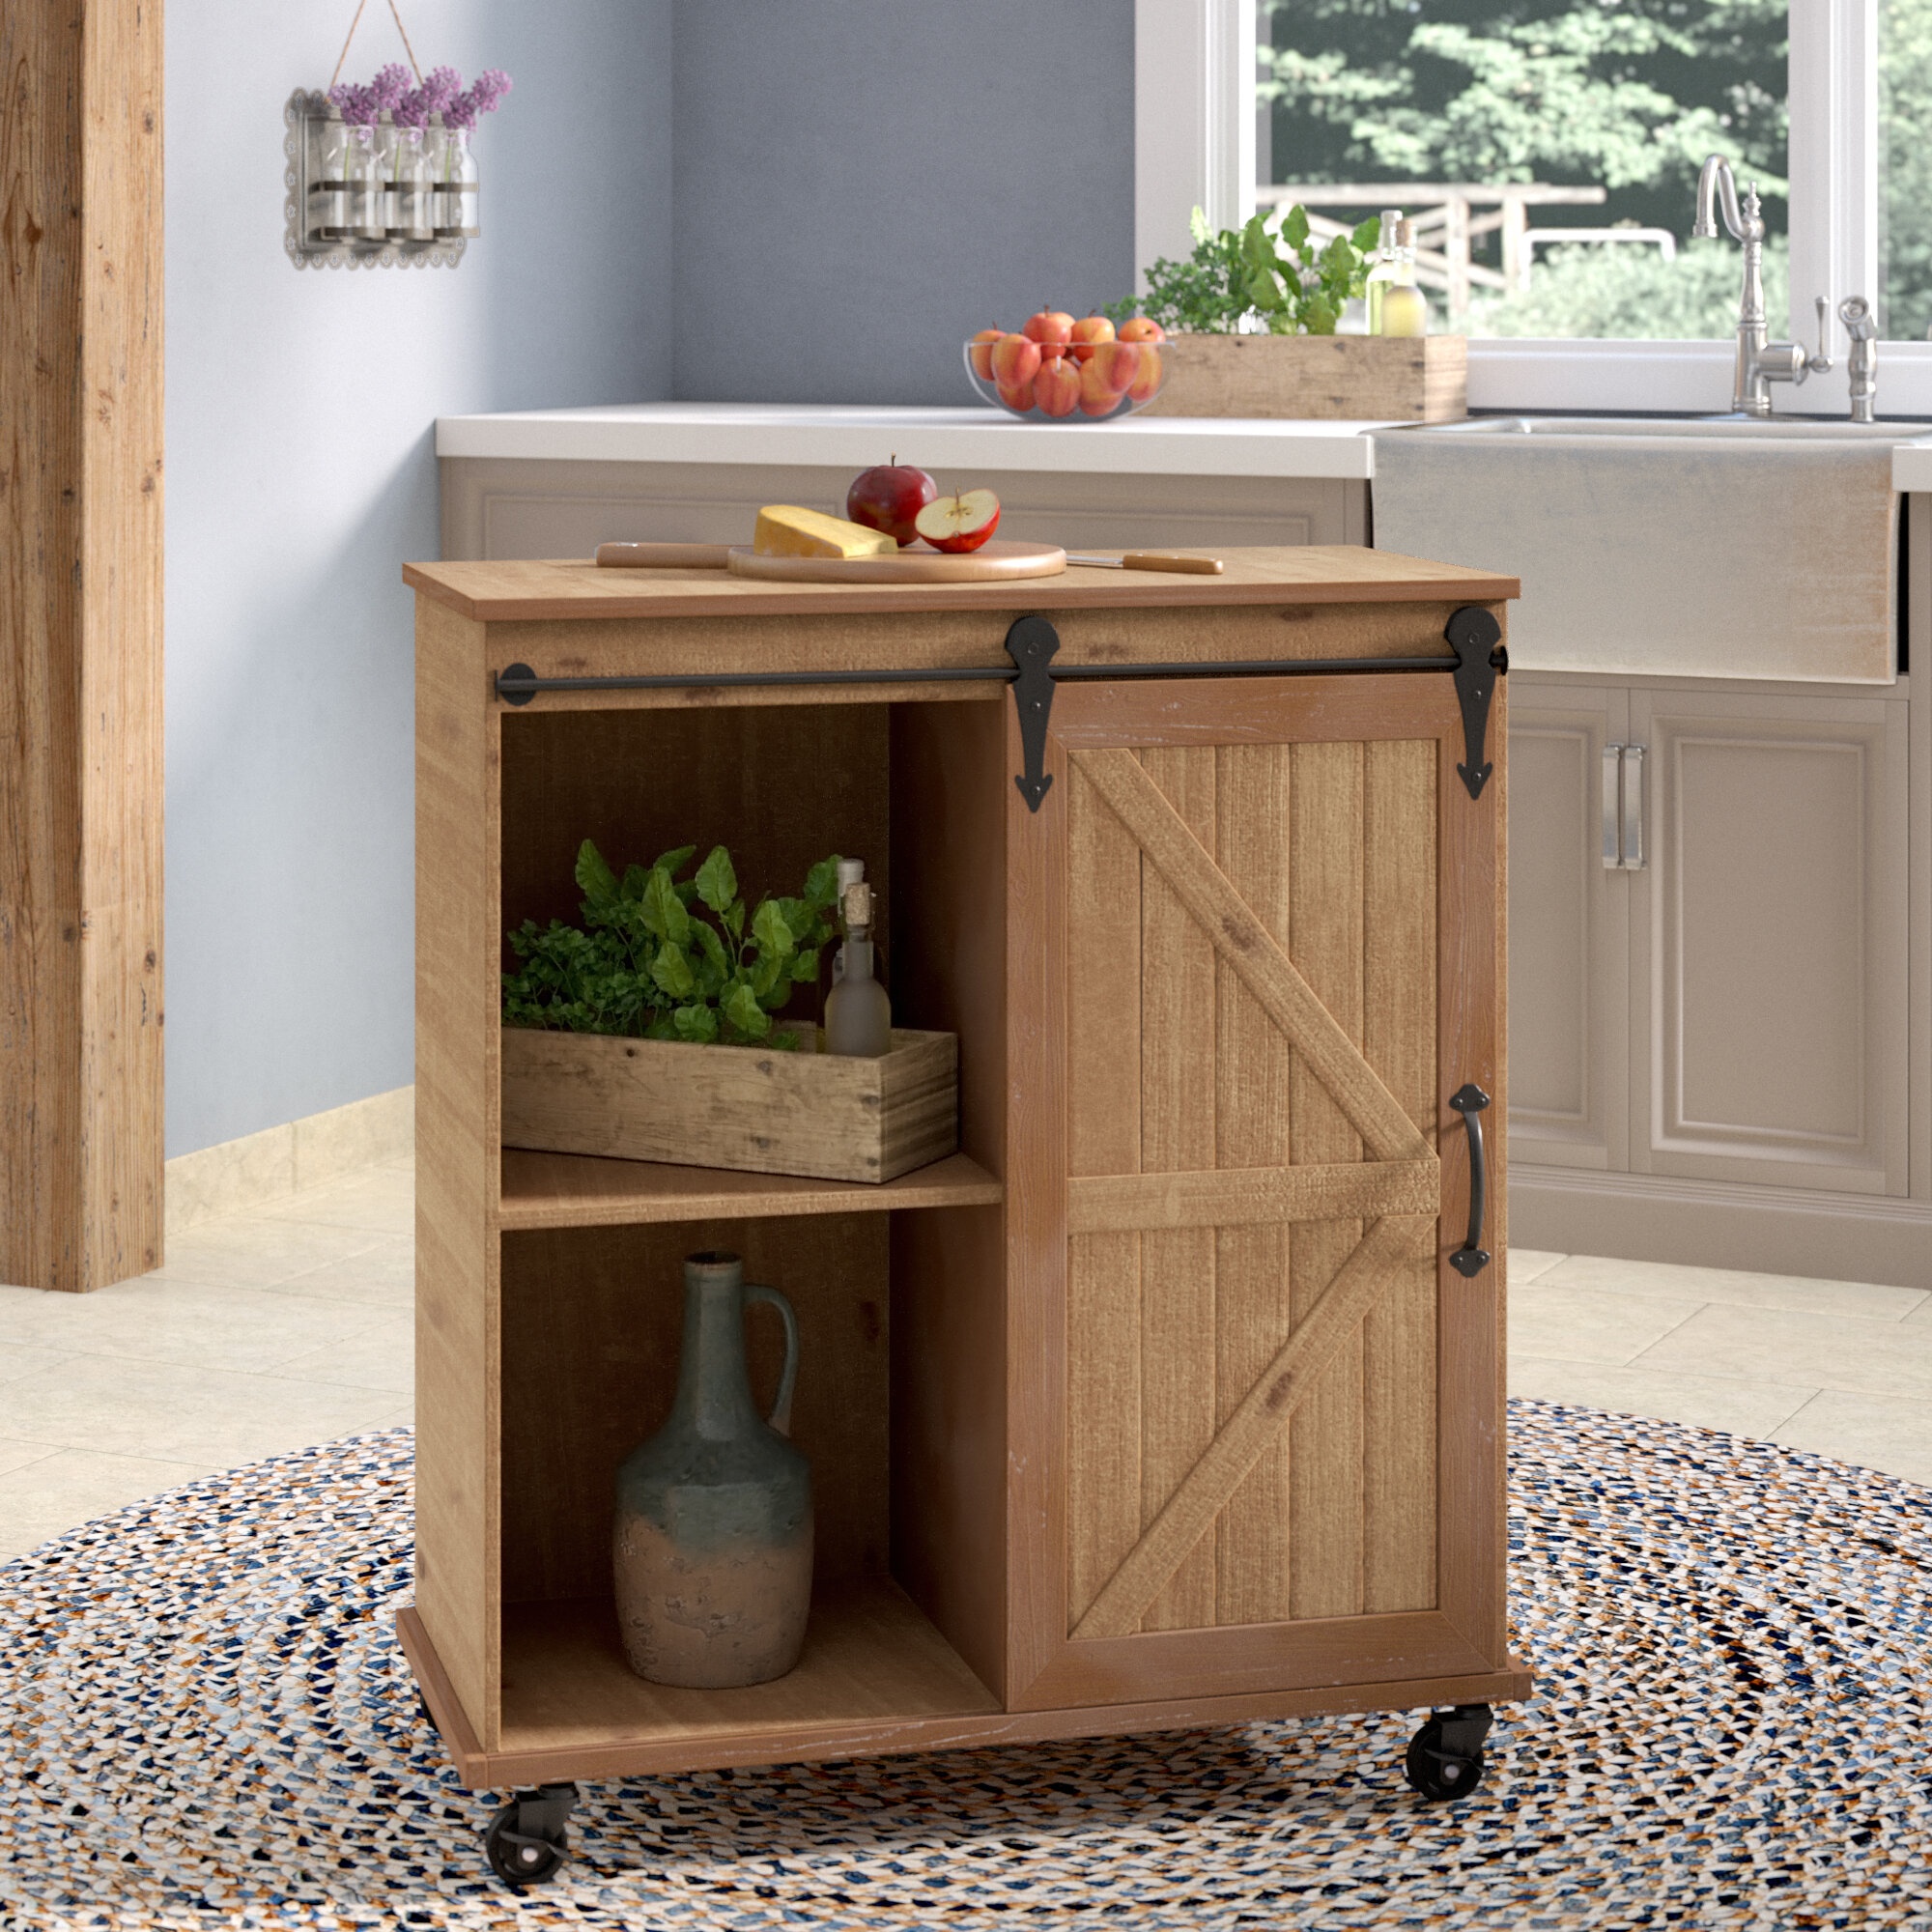 August Grove Aghan Multi Purpose Wooden Rolling Kitchen Cart Reviews Wayfair